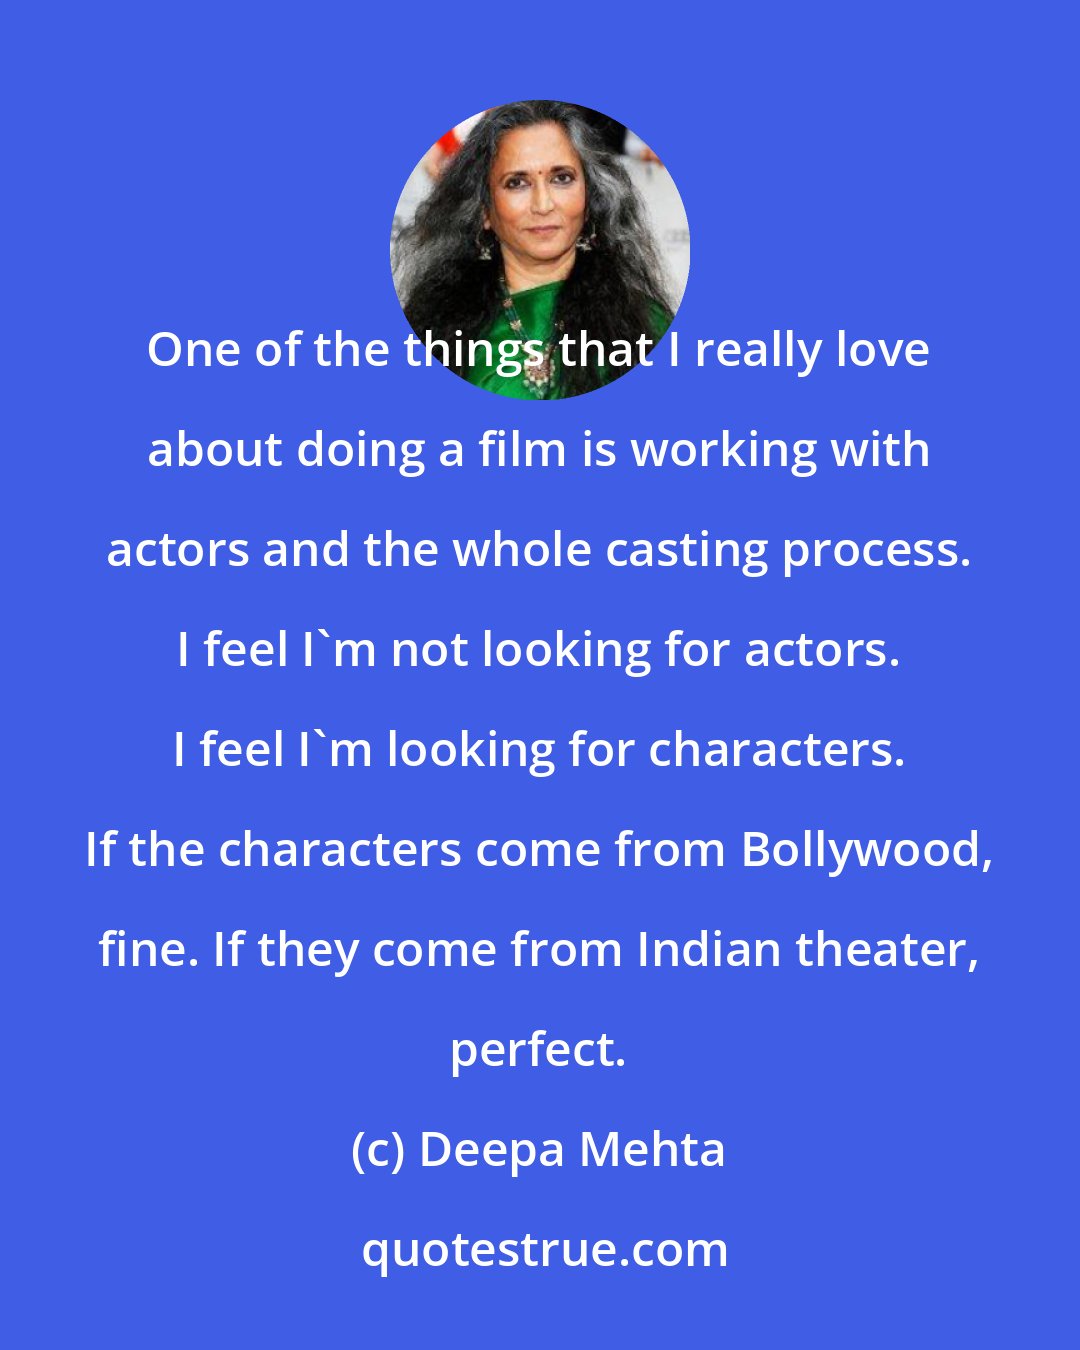 Deepa Mehta: One of the things that I really love about doing a film is working with actors and the whole casting process. I feel I'm not looking for actors. I feel I'm looking for characters. If the characters come from Bollywood, fine. If they come from Indian theater, perfect.